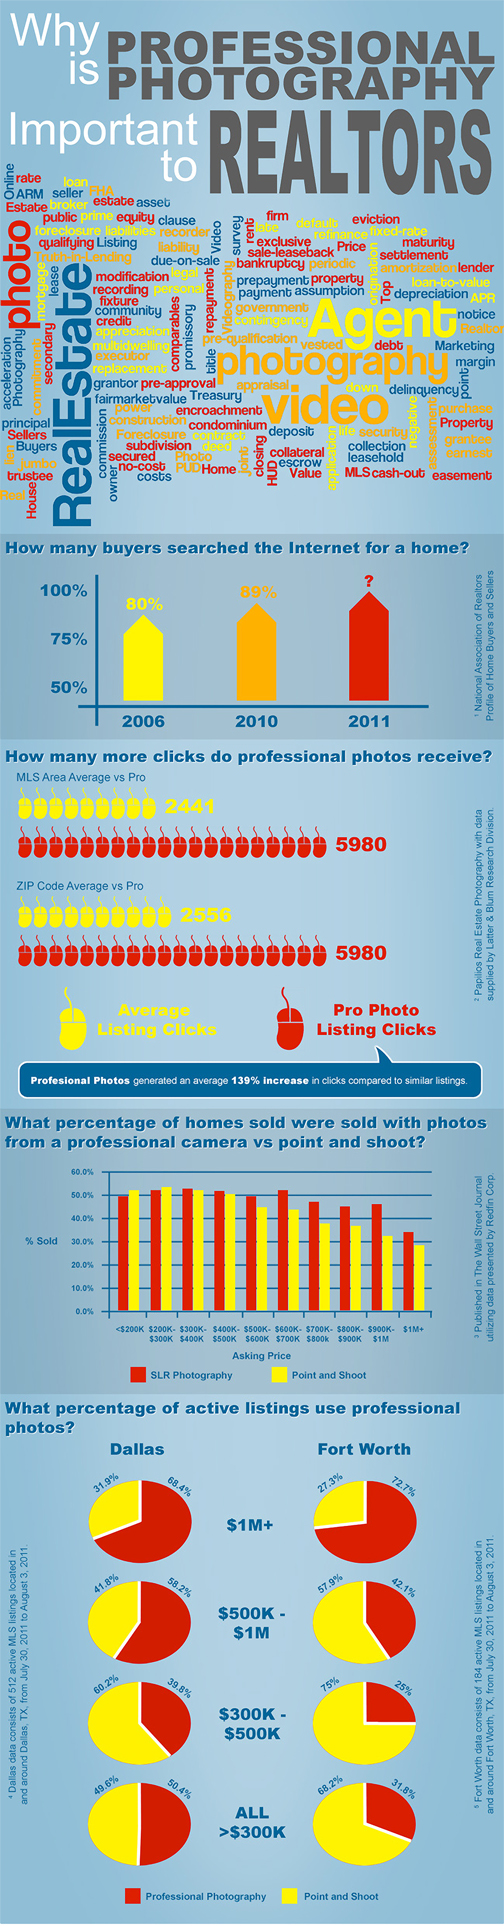 why professional photography is important to realtors